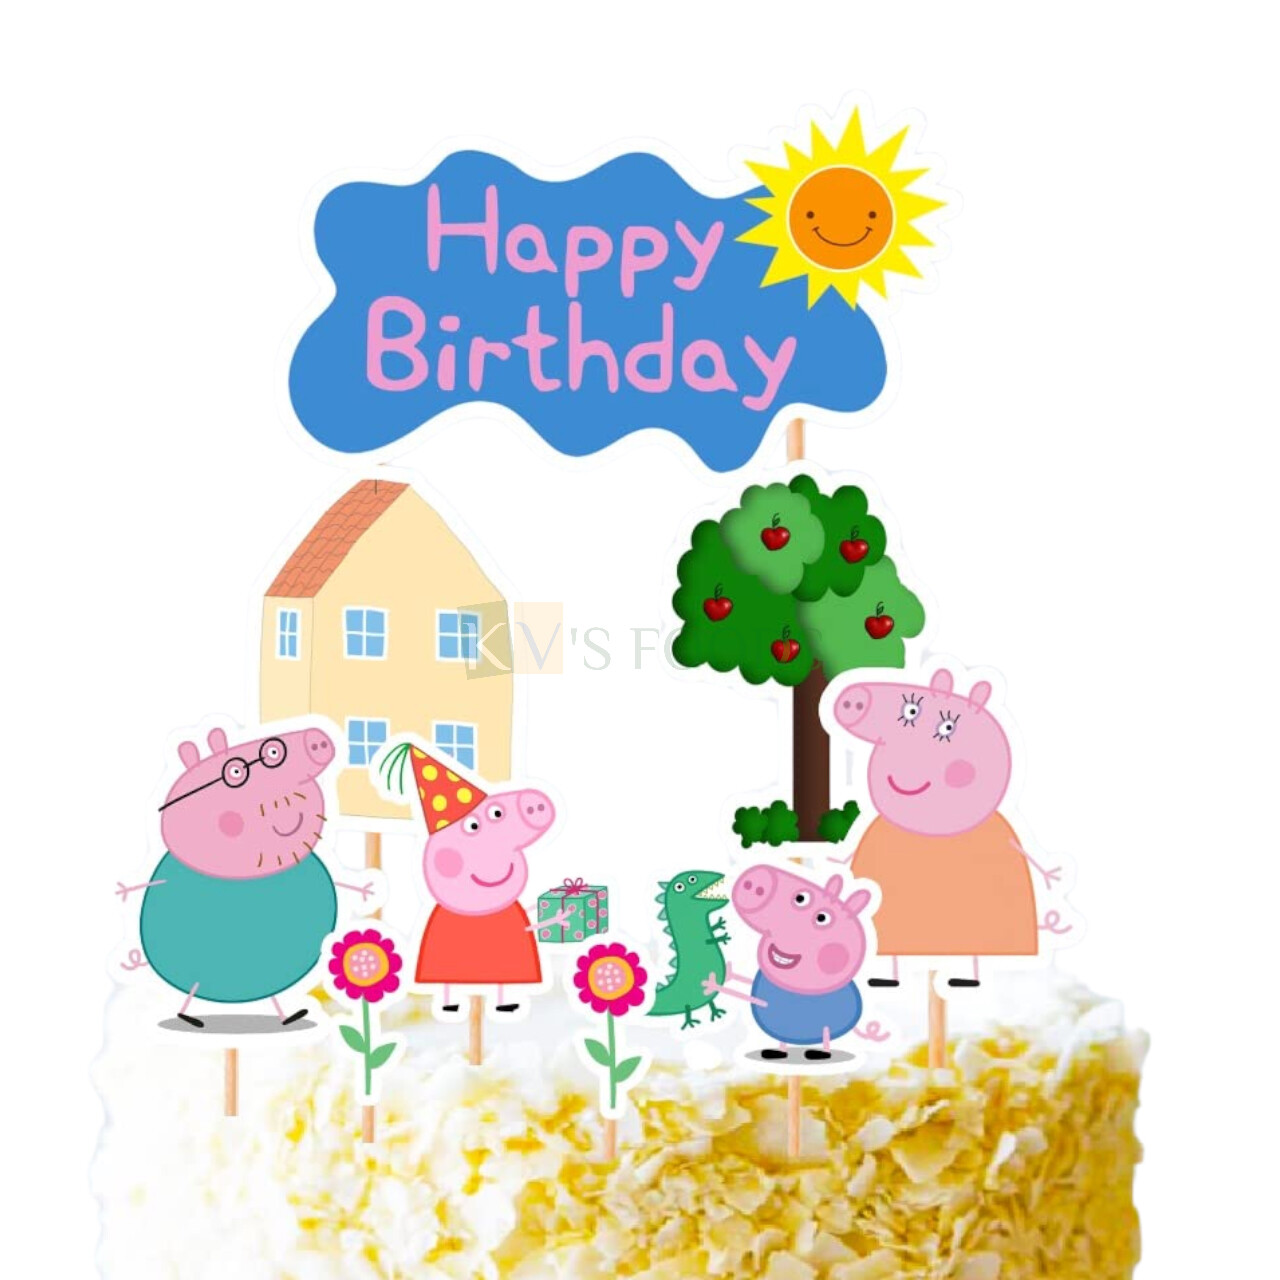 7 PC Peppa Pig Cartoon Theme, Cake Topper Insert, Cake Topper, Cupcake Toppers Bday, Girls, Boys, Friends Bday Decorations Items/Cake Accessories, Tags, Cards, Cake Toothpick Topper